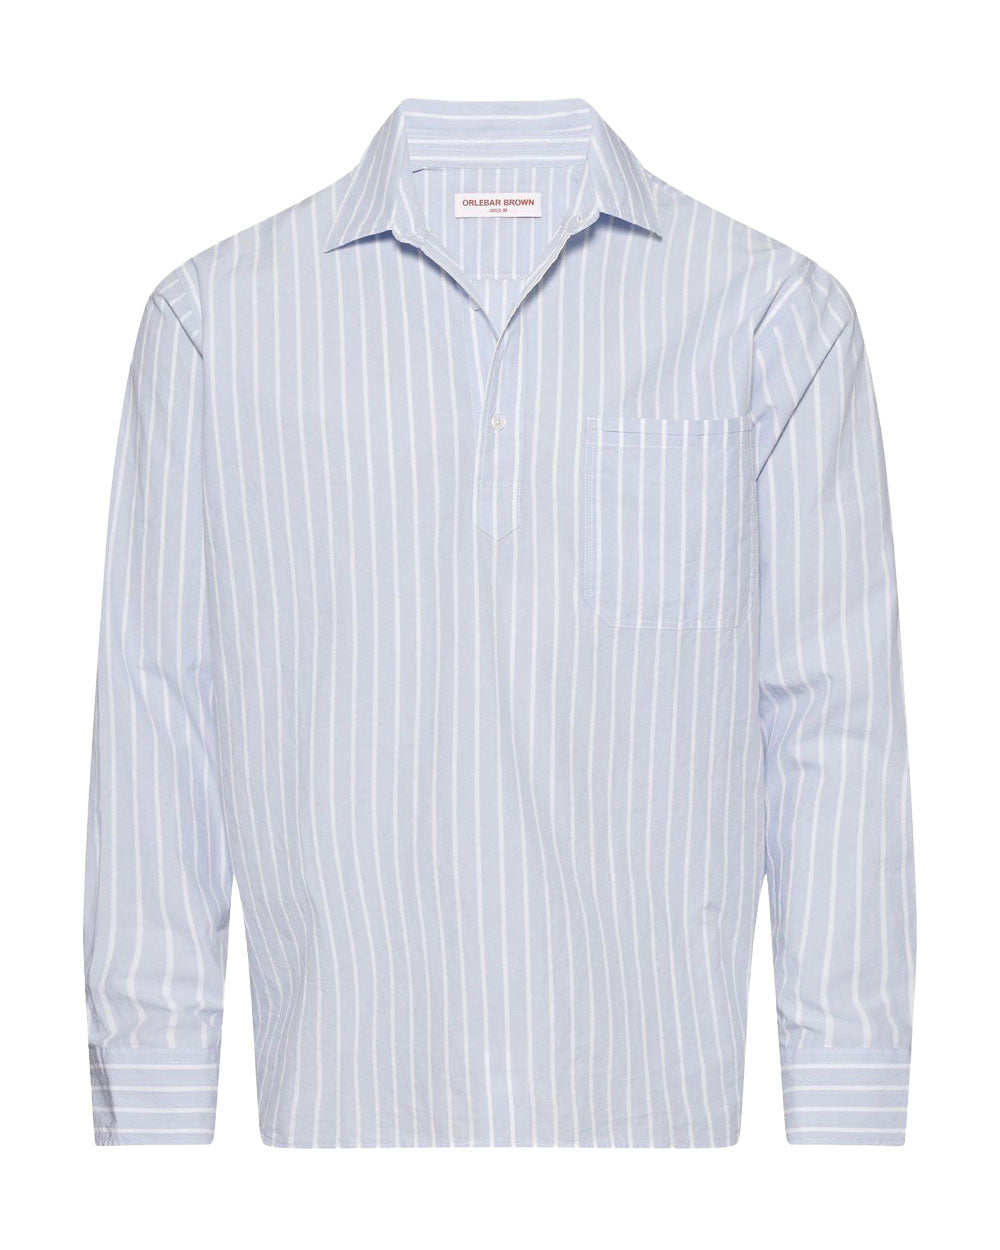 Serenity Blue and White Shanklin Collar Shirt